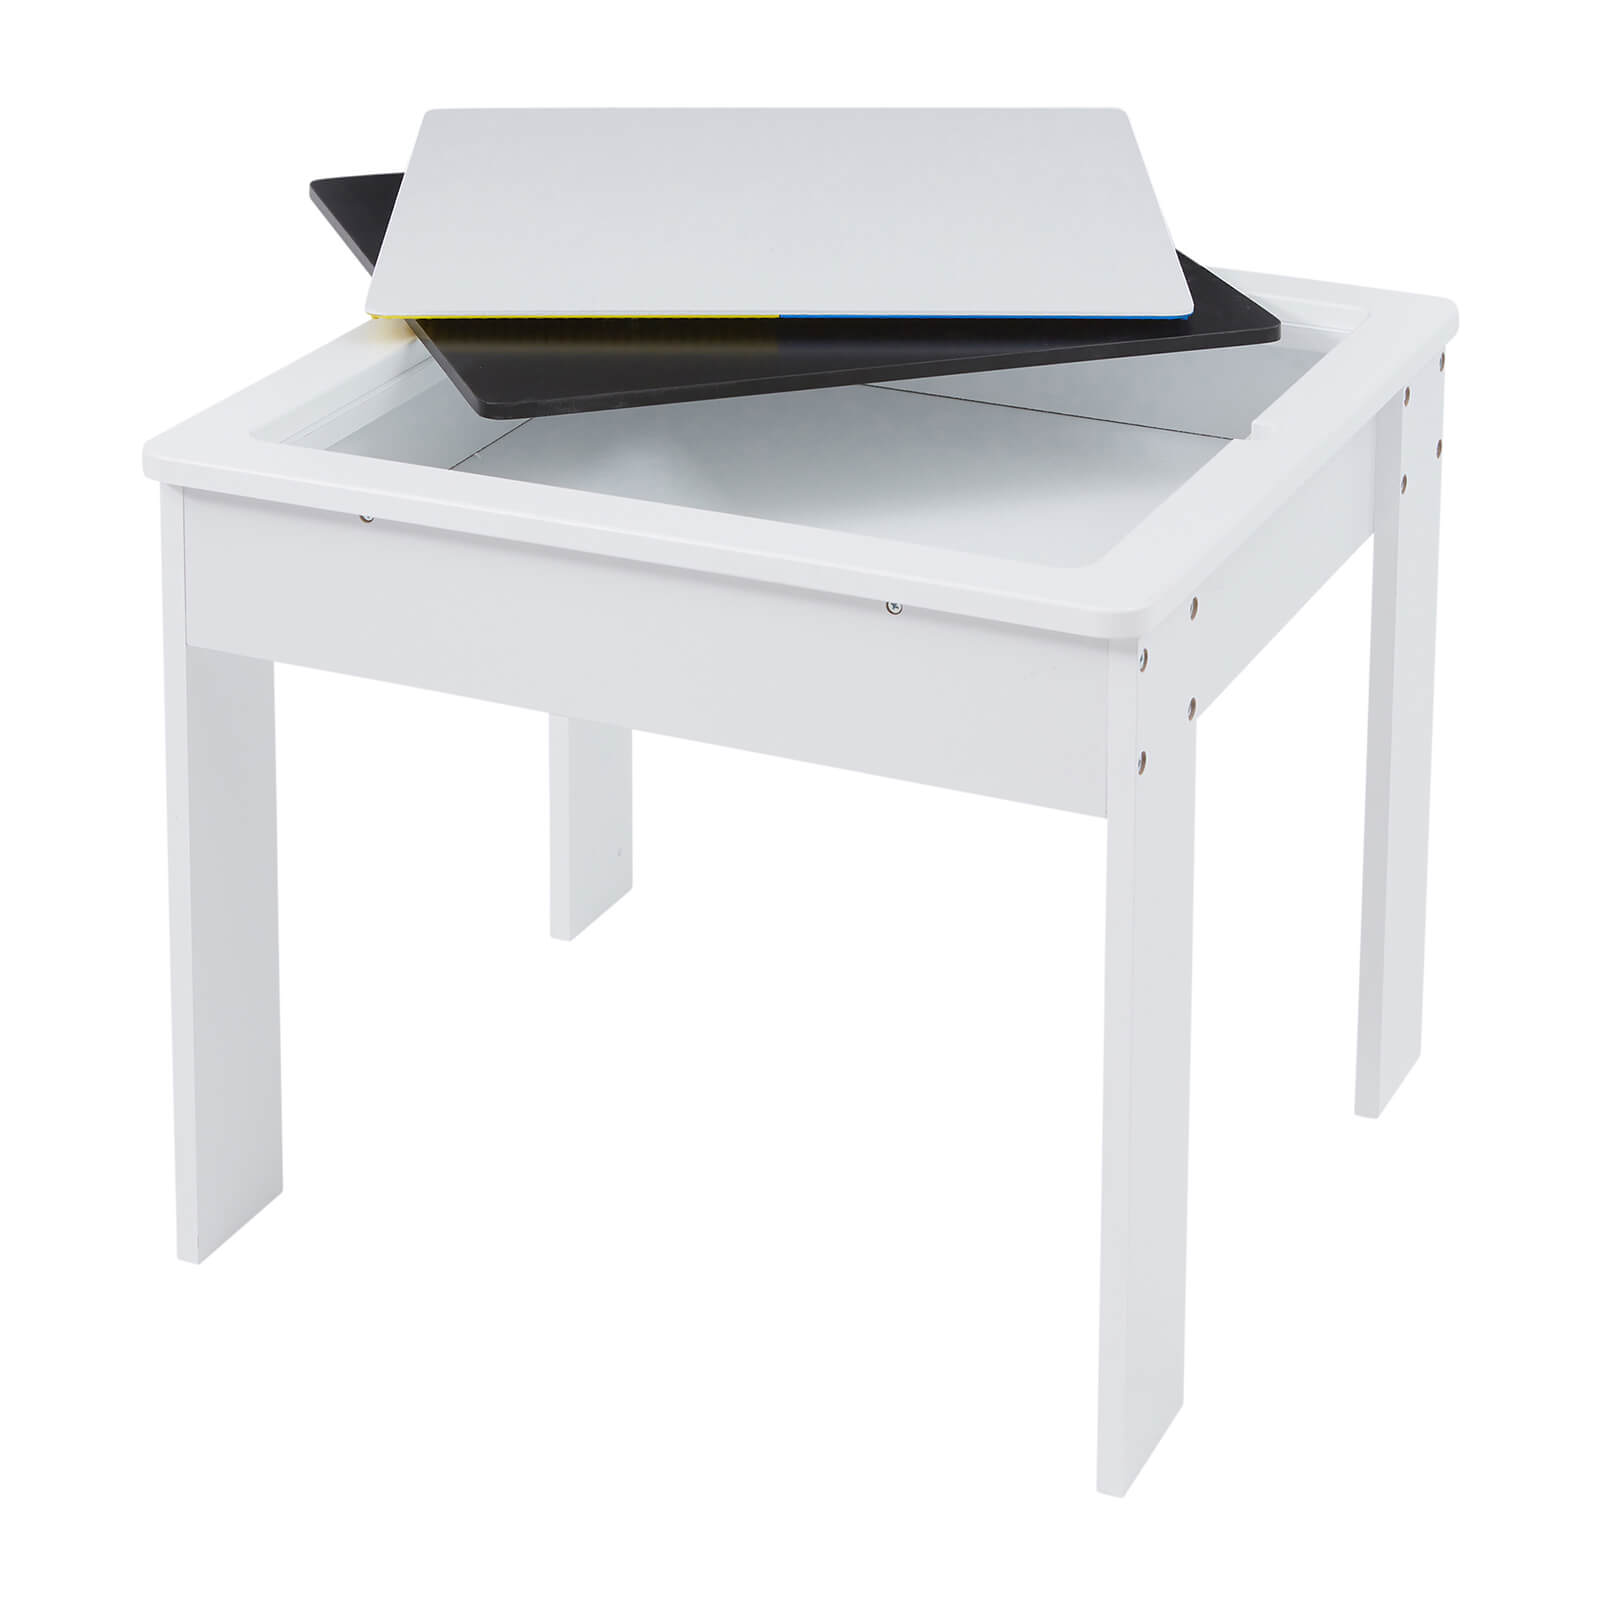 Activity Table with Reversible Top - White